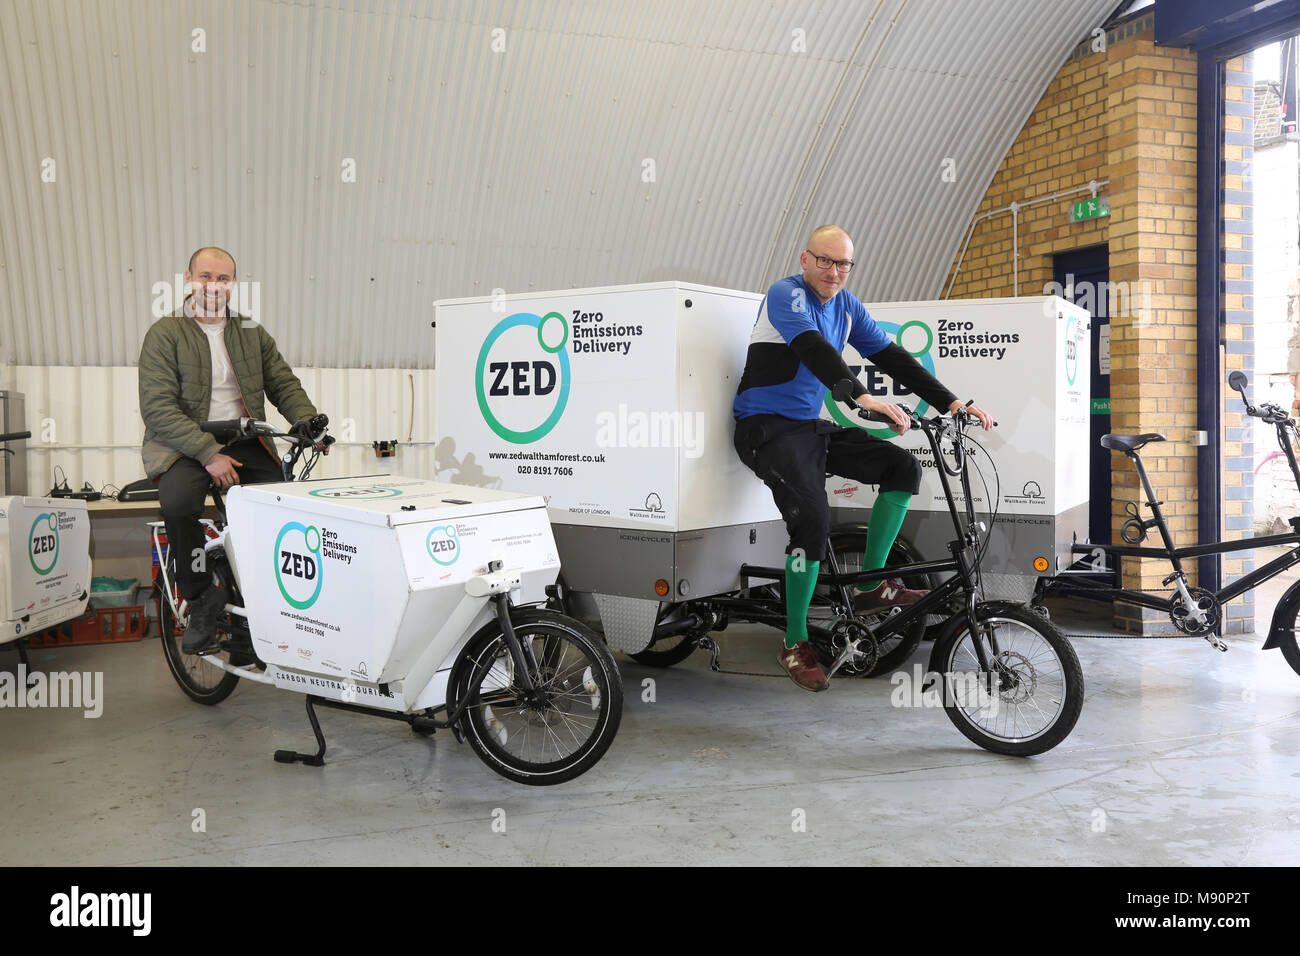 Staff from a Zero Emissions delivery company sit on electric cargo bikes used to distribute goods in Walthamstow, North London. Stock Photo